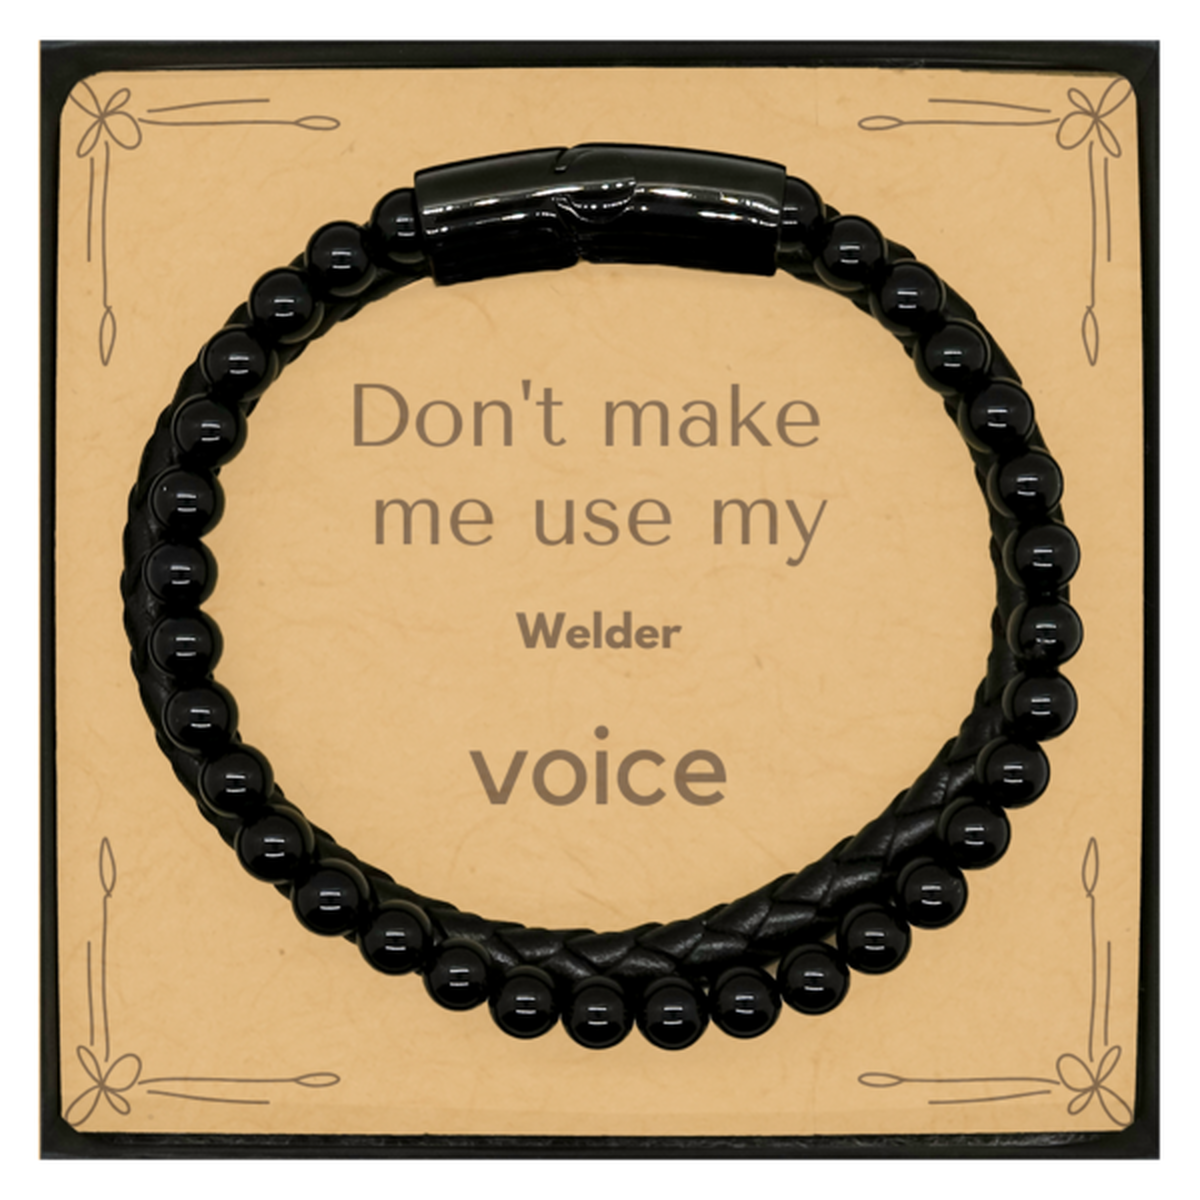 Don't make me use my Welder voice, Sarcasm Welder Card Gifts, Christmas Welder Stone Leather Bracelets Birthday Unique Gifts For Welder Coworkers, Men, Women, Colleague, Friends